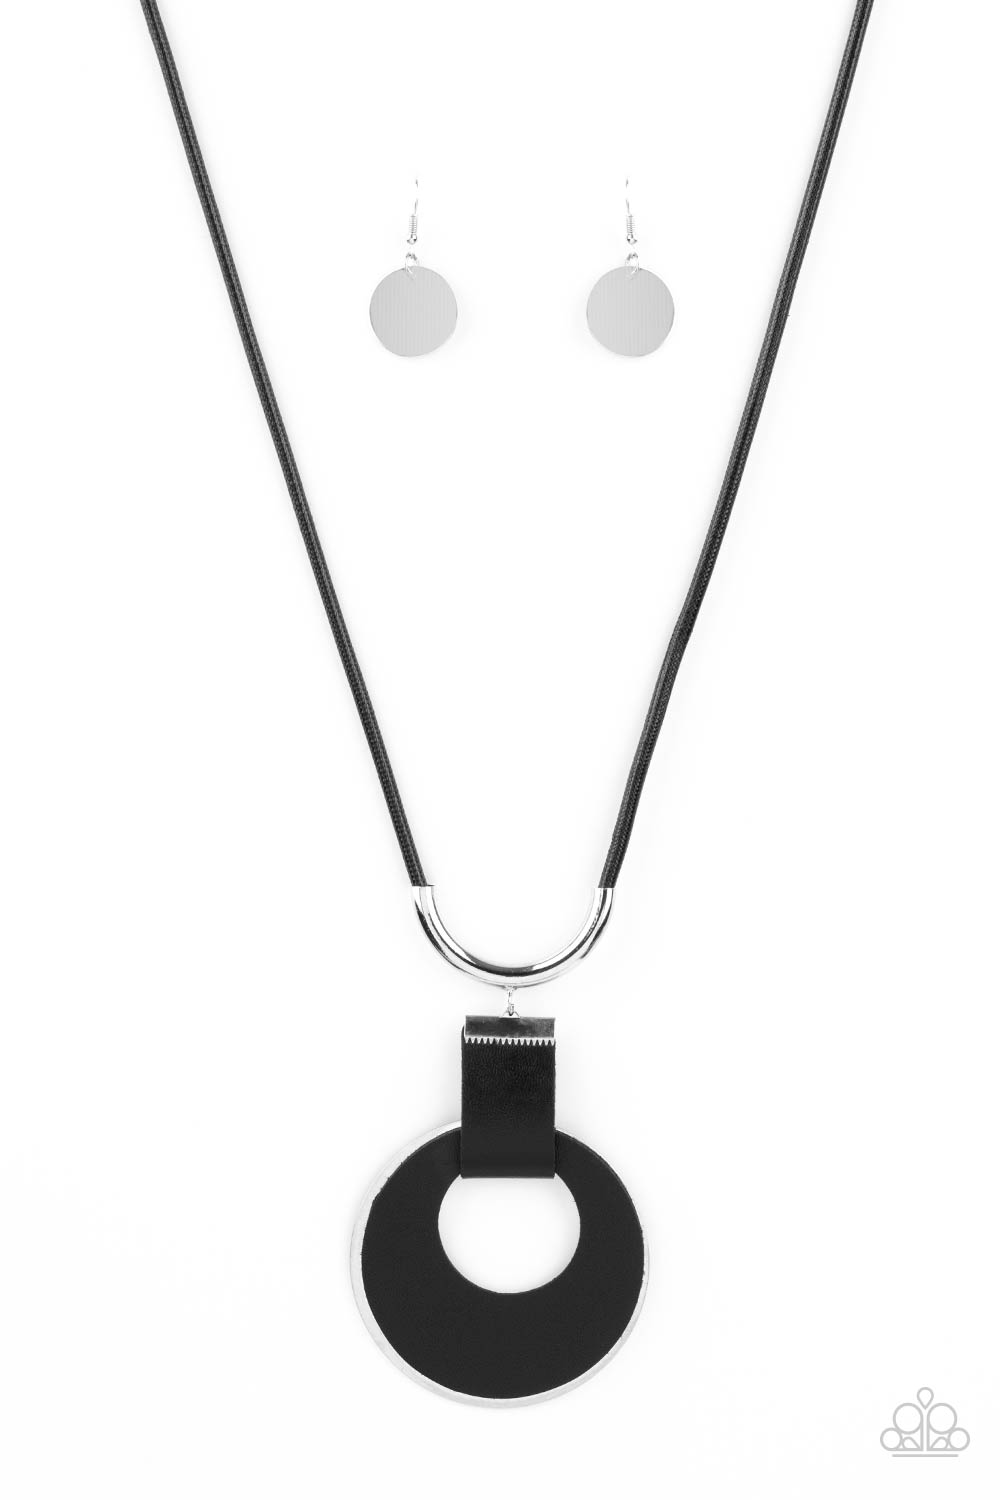 Luxe Crush - Black Leather Disc Necklaces a large cutout silver disc, overlaid with black leather, is cradled in a wide black leather strap. The luxe pendant sways from a U-shaped silver cylinder threaded along the end of a lengthened polished black cord for an indulgently lavish finish. Features a sliding bead closure.  Sold as one individual necklace. Includes one pair of matching earrings.  Paparazzi Jewelry is lead and nickel free so it's perfect for sensitive skin too!